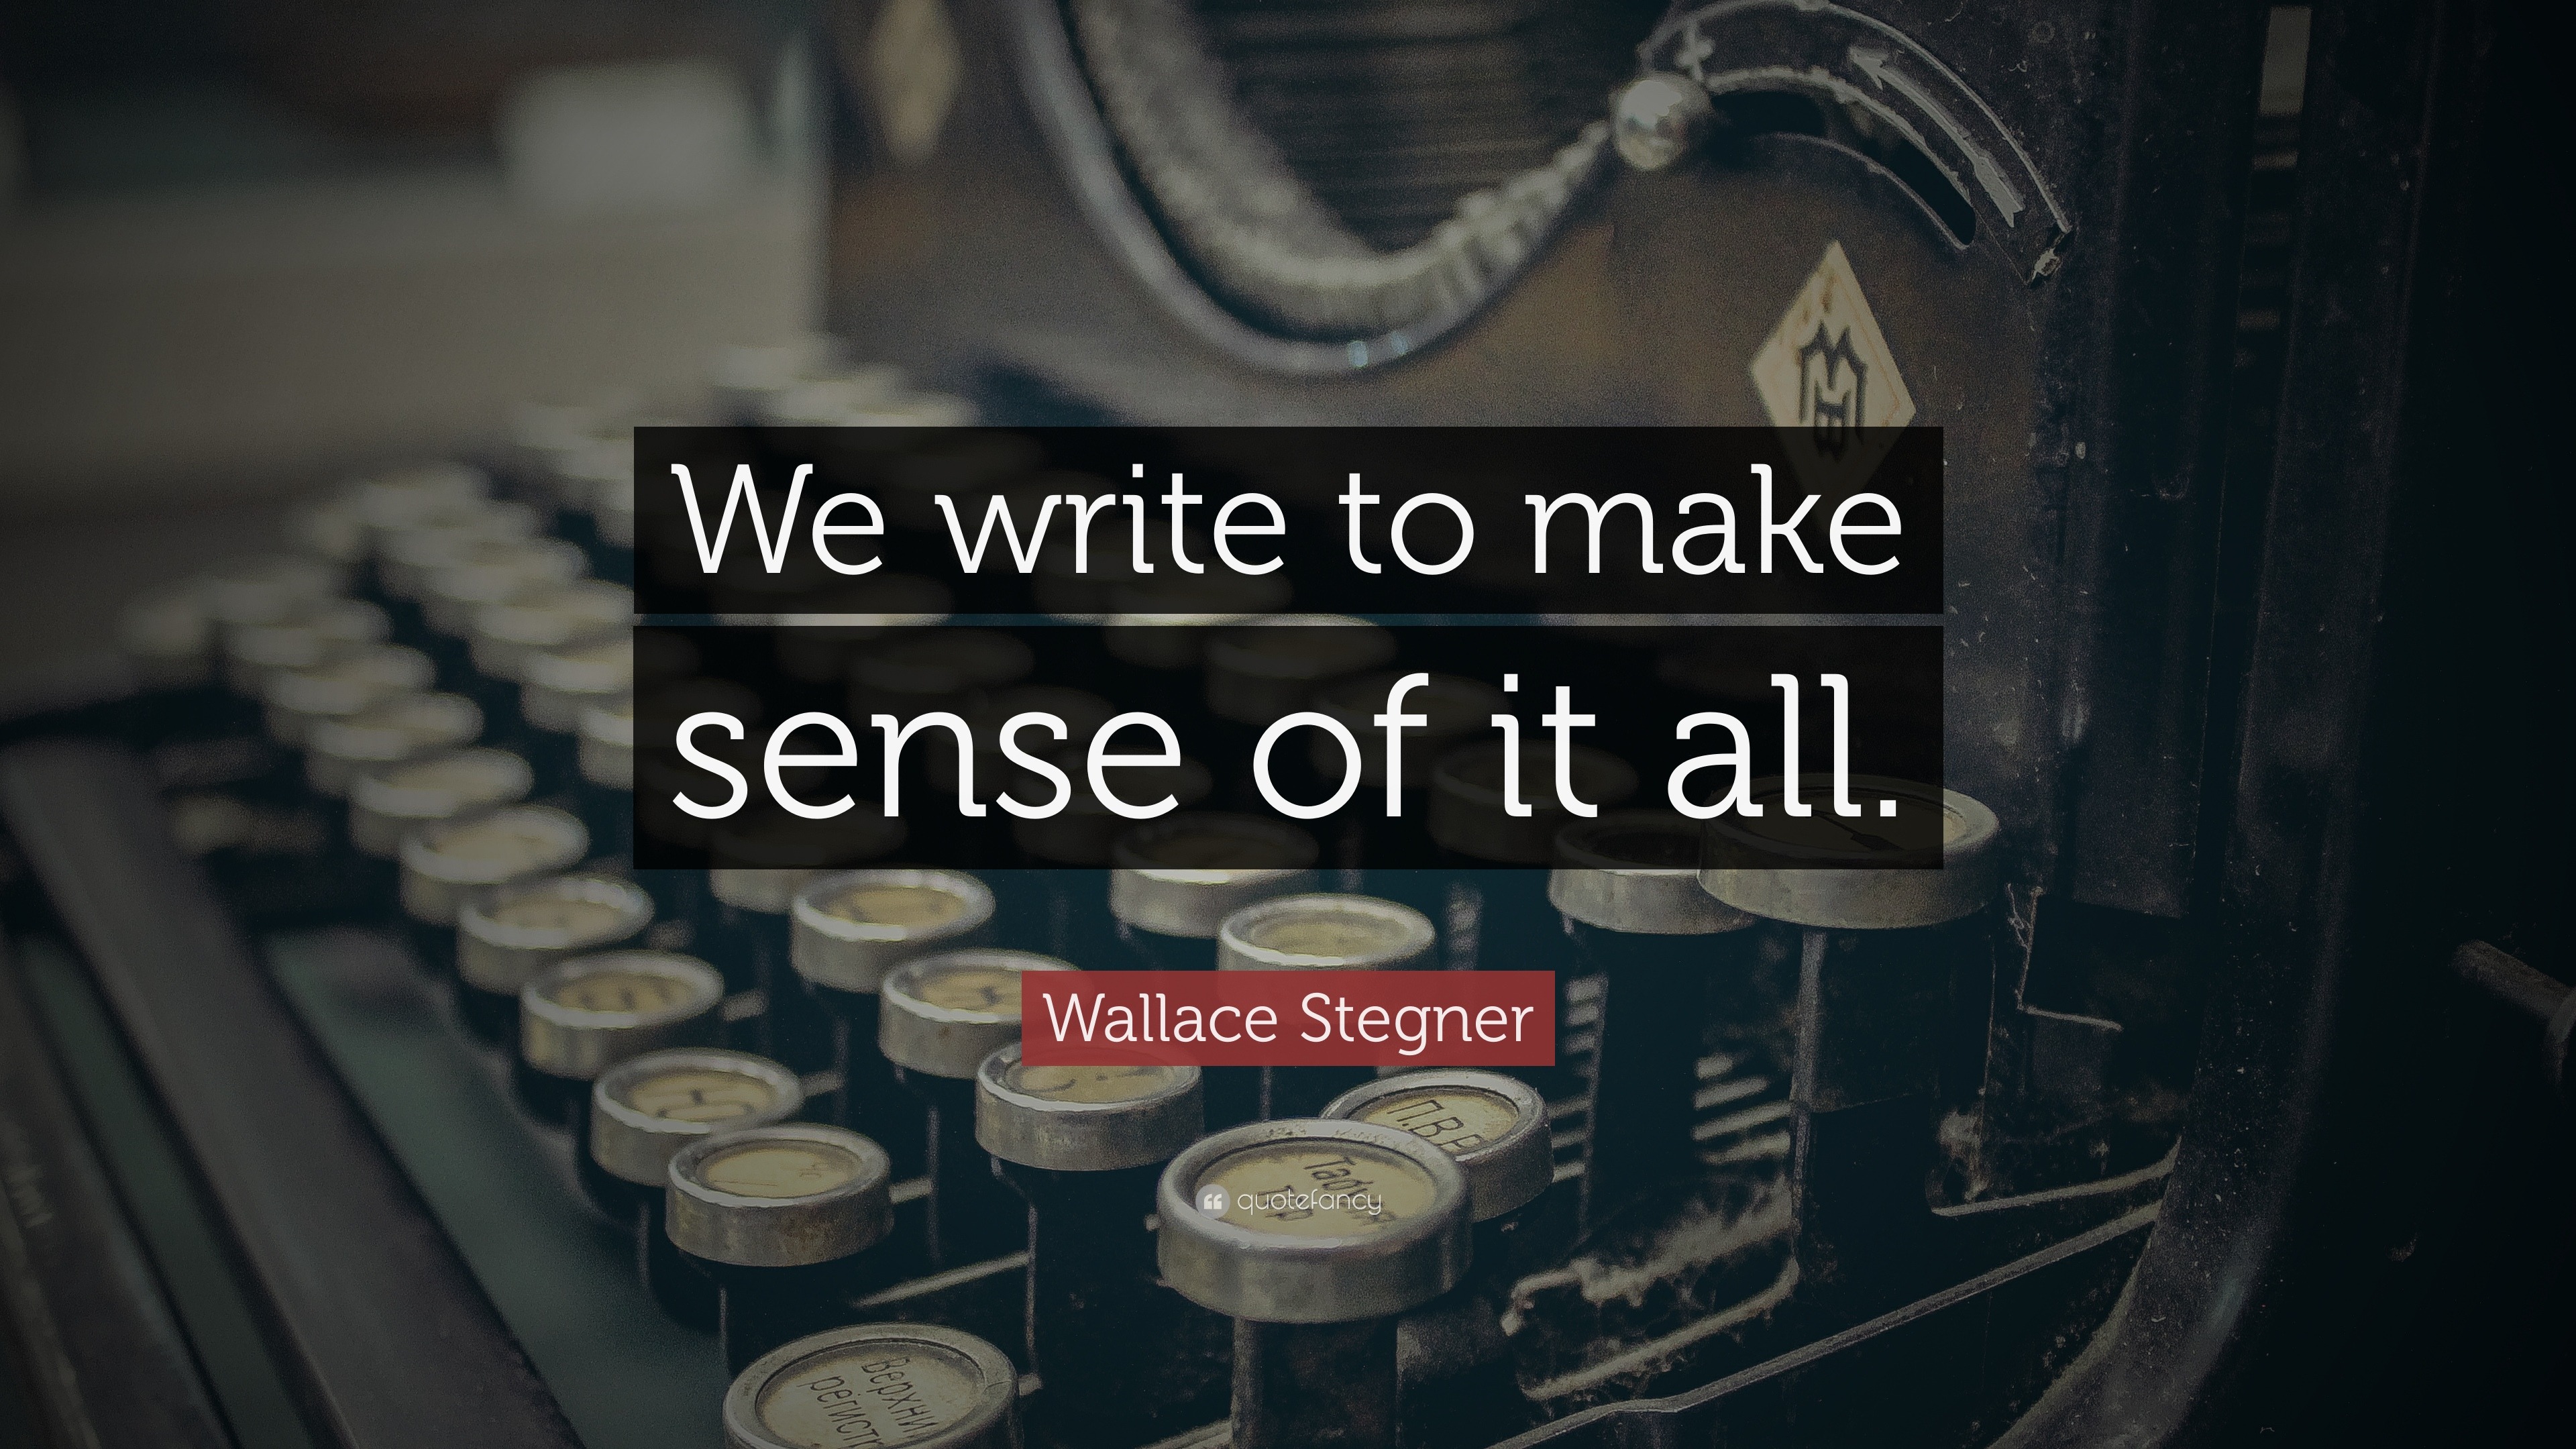 Wallace Stegner Quote “We write to make sense of it all ”